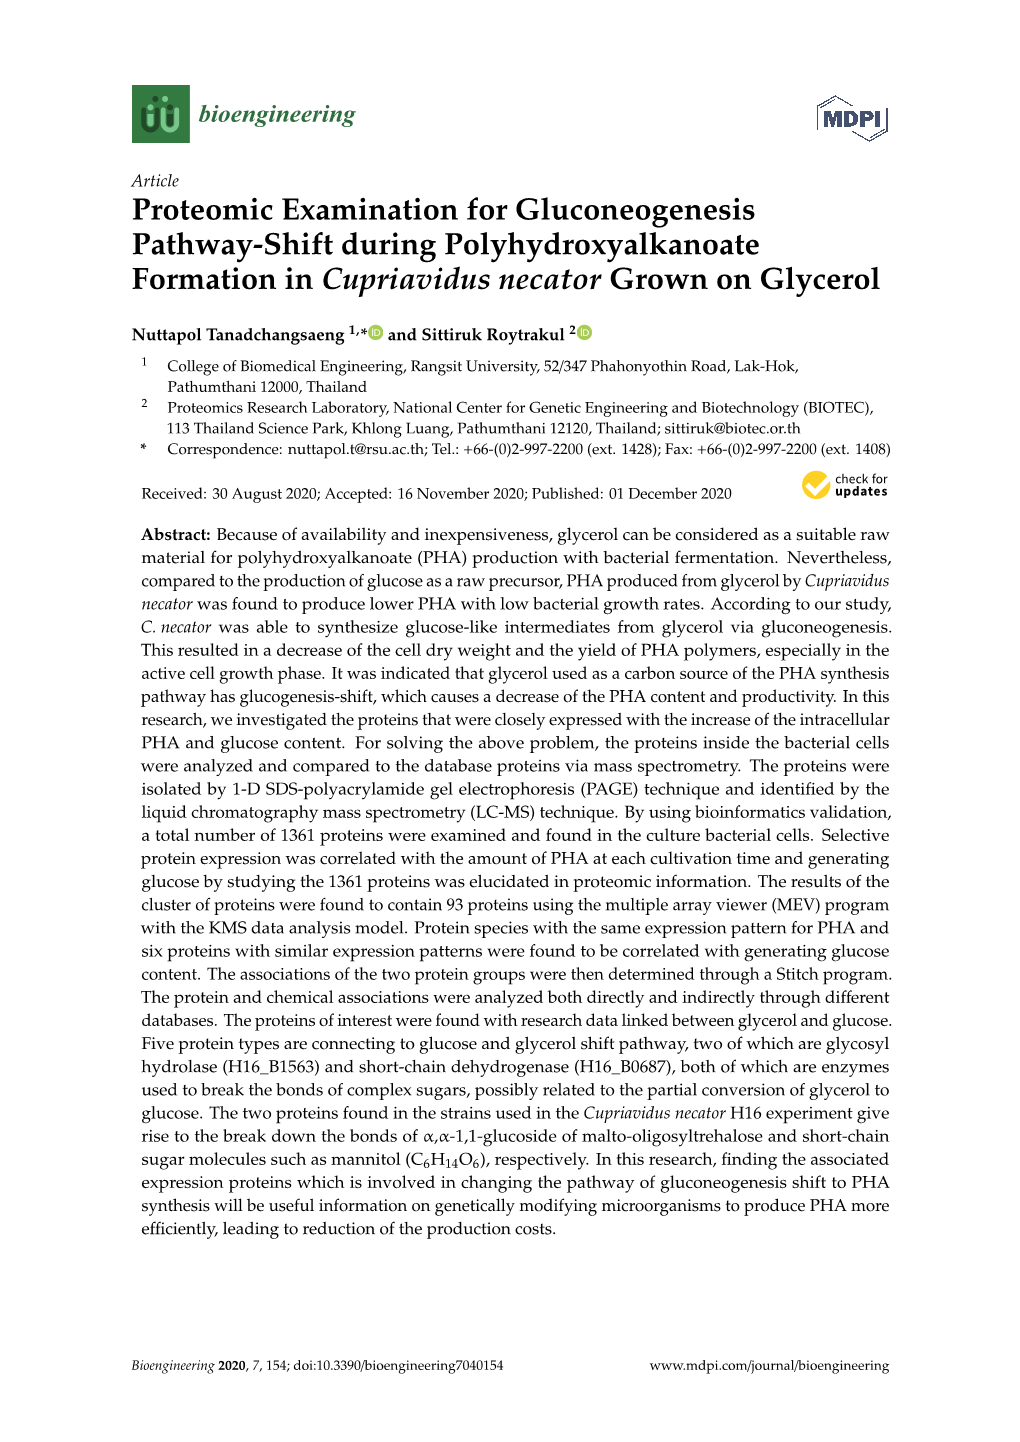 Proteomic Examination for Gluconeogenesis Pathway-Shift During Polyhydroxyalkanoate Formation in Cupriavidus Necator Grown on Glycerol